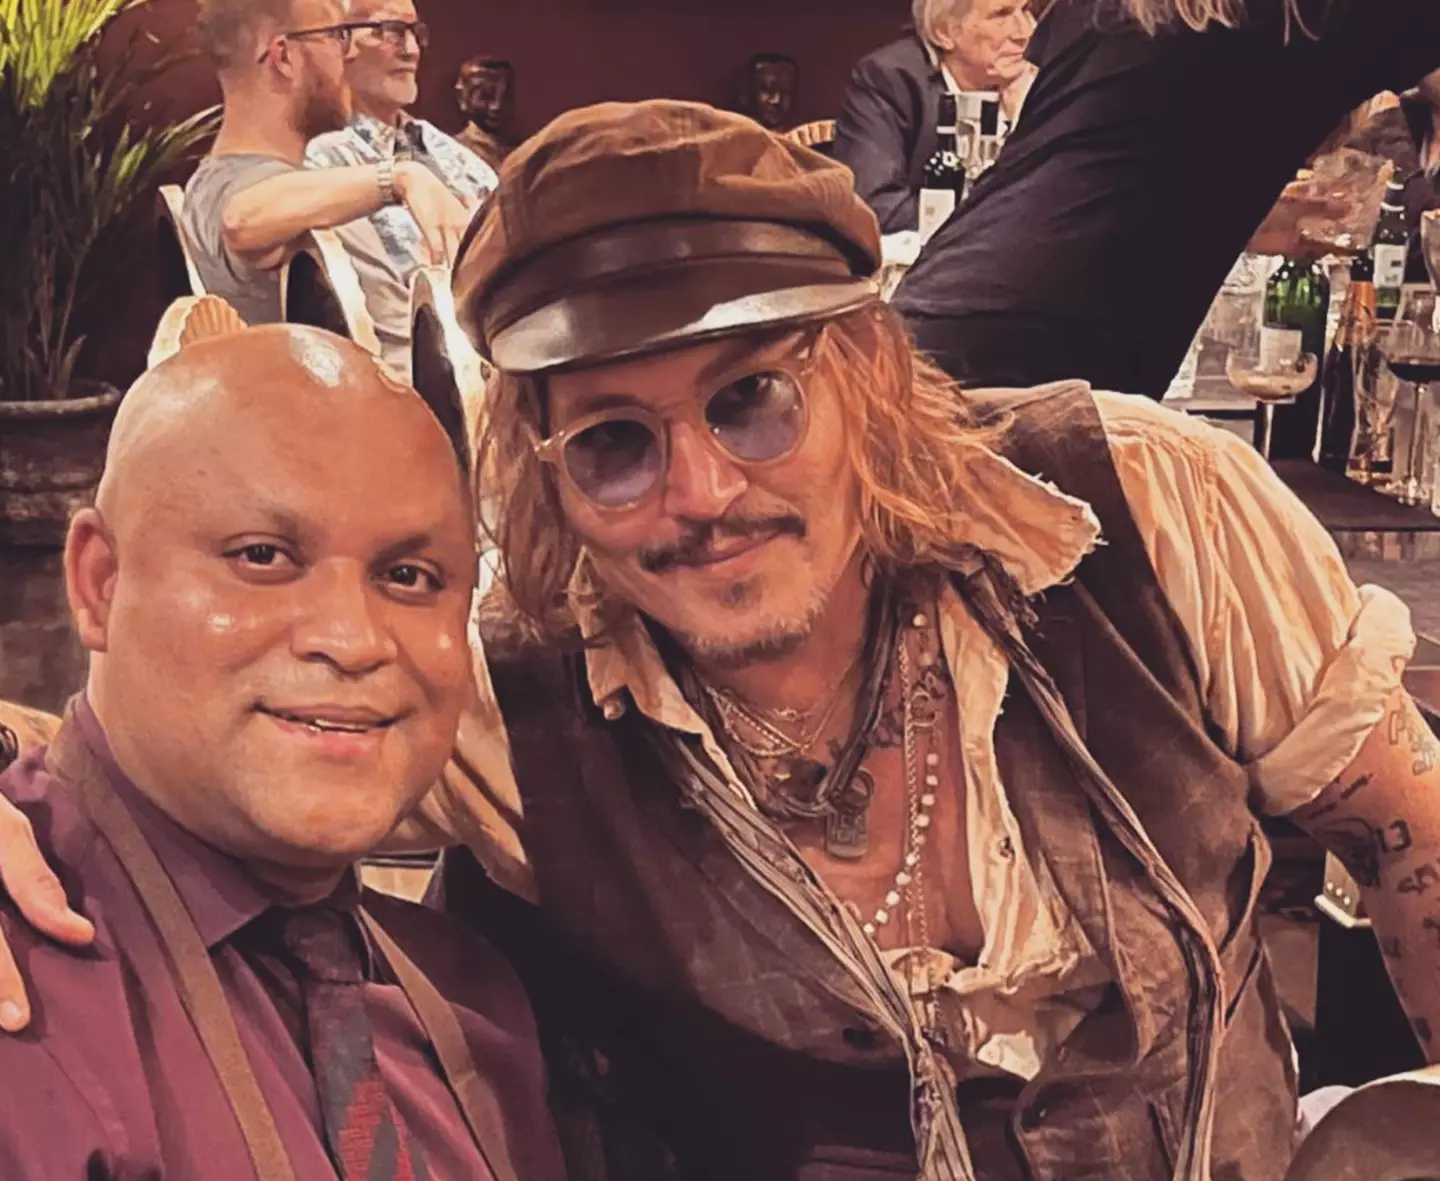 Depp posed for multiple photos at the restaurant.